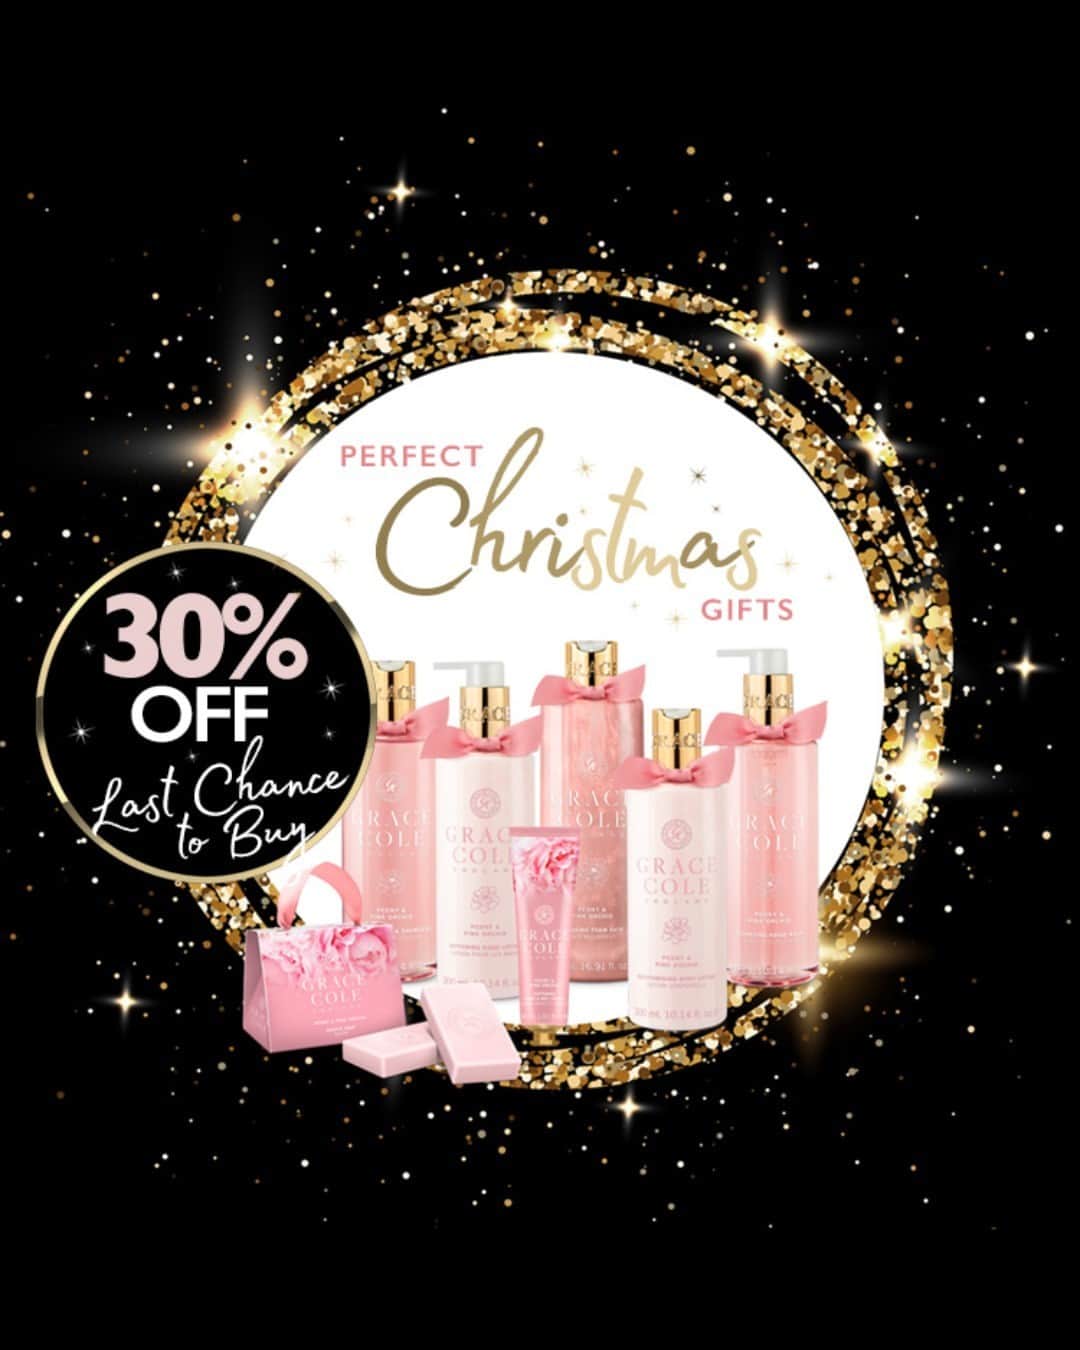 Grace Coleのインスタグラム：「LAST CHANCE TO BUY - 30% off your favourite Grace Cole products and fragrances.  Perfect Christmas gifts for a loved one, friend or simply treat yourself! Link in Bio  #christmas #christmasgifts #gifts #presents #discount #lastchance #30%off #bargain #whilststockslast」